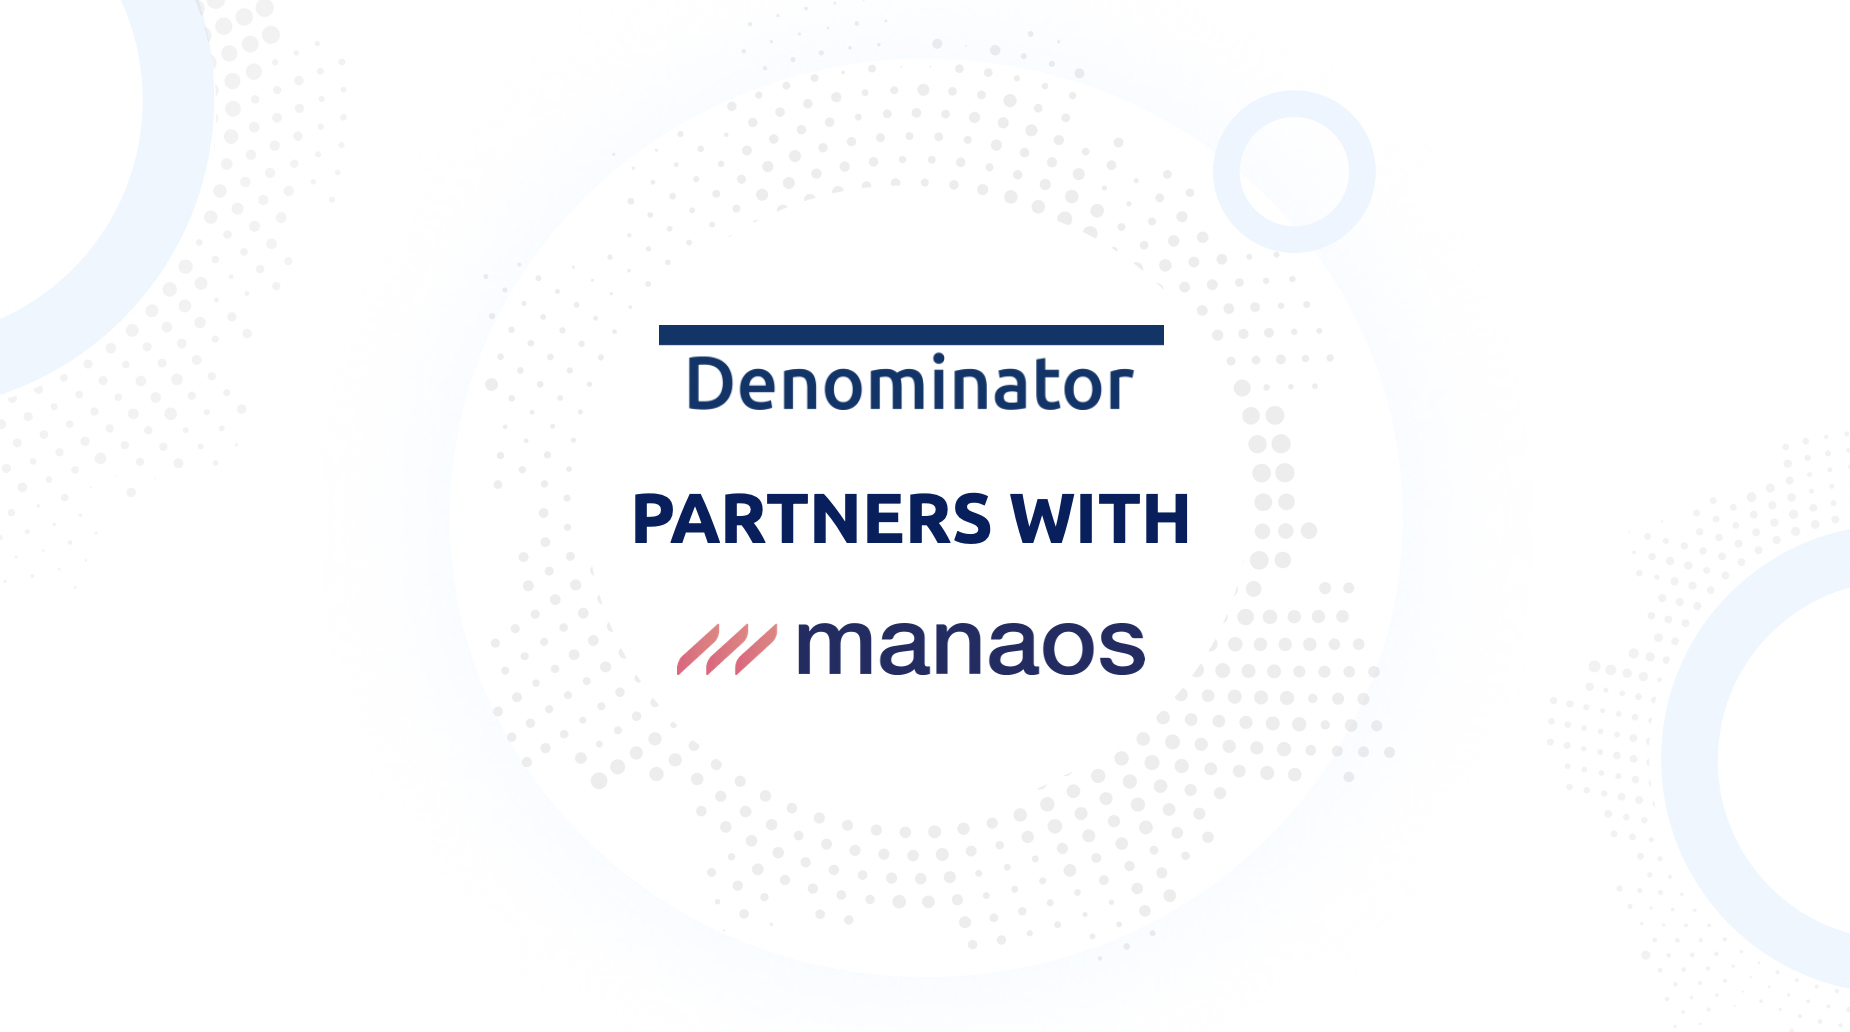 Denominator and Manaos announce a partnership to strengthen Diversity, Equity, & Inclusion in the ESG data market place